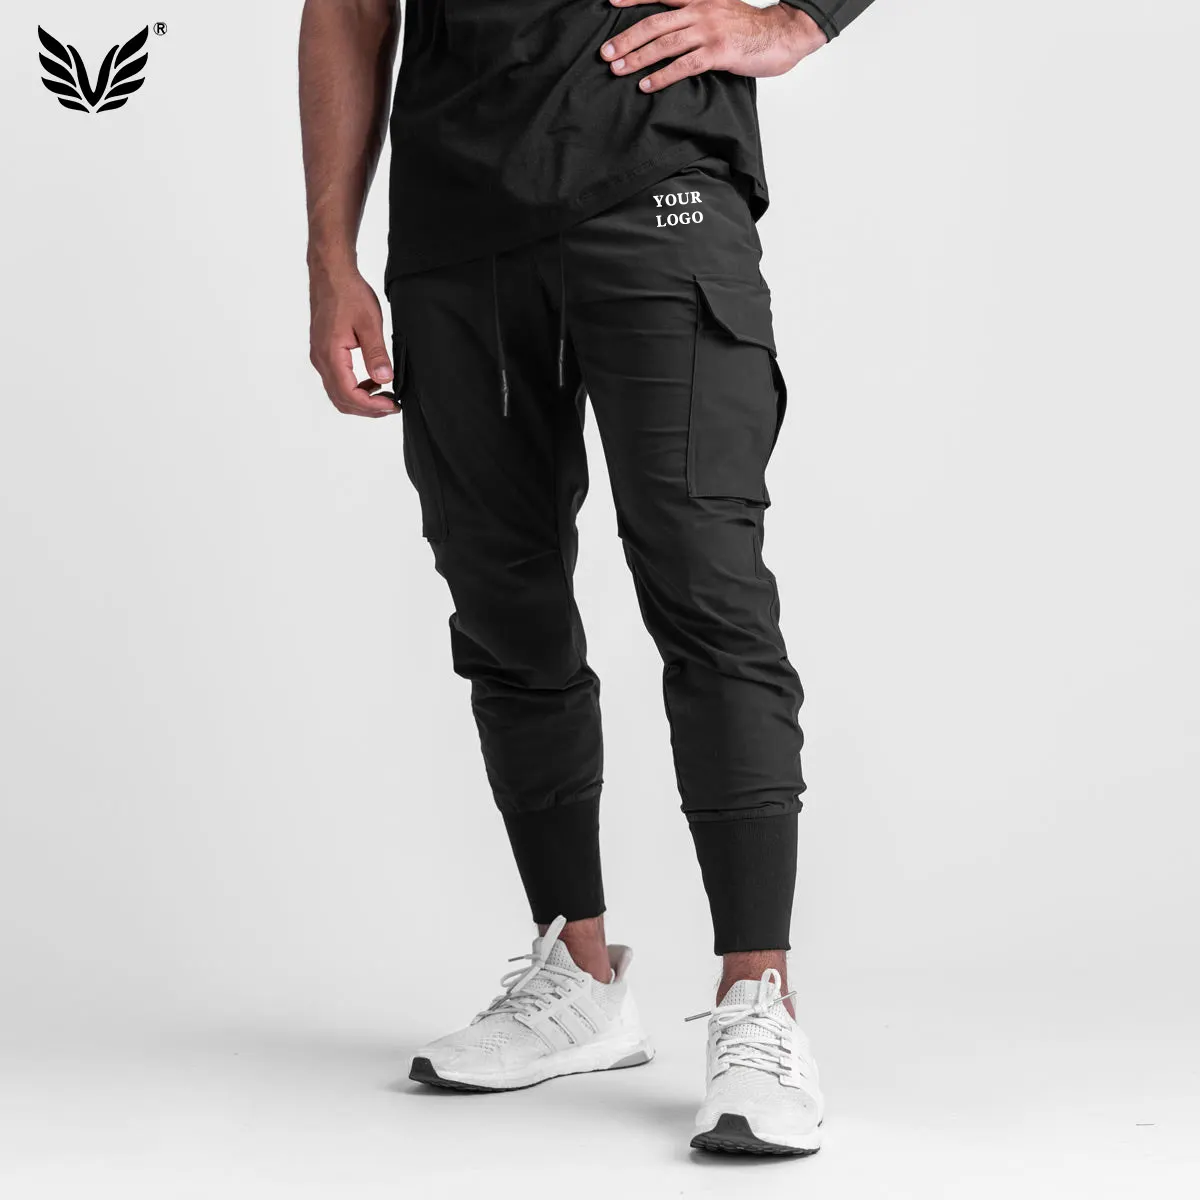 High Quality Nylon Men's Joggers with Mesh Pockets and Cargo Pants Sports Wear for men's